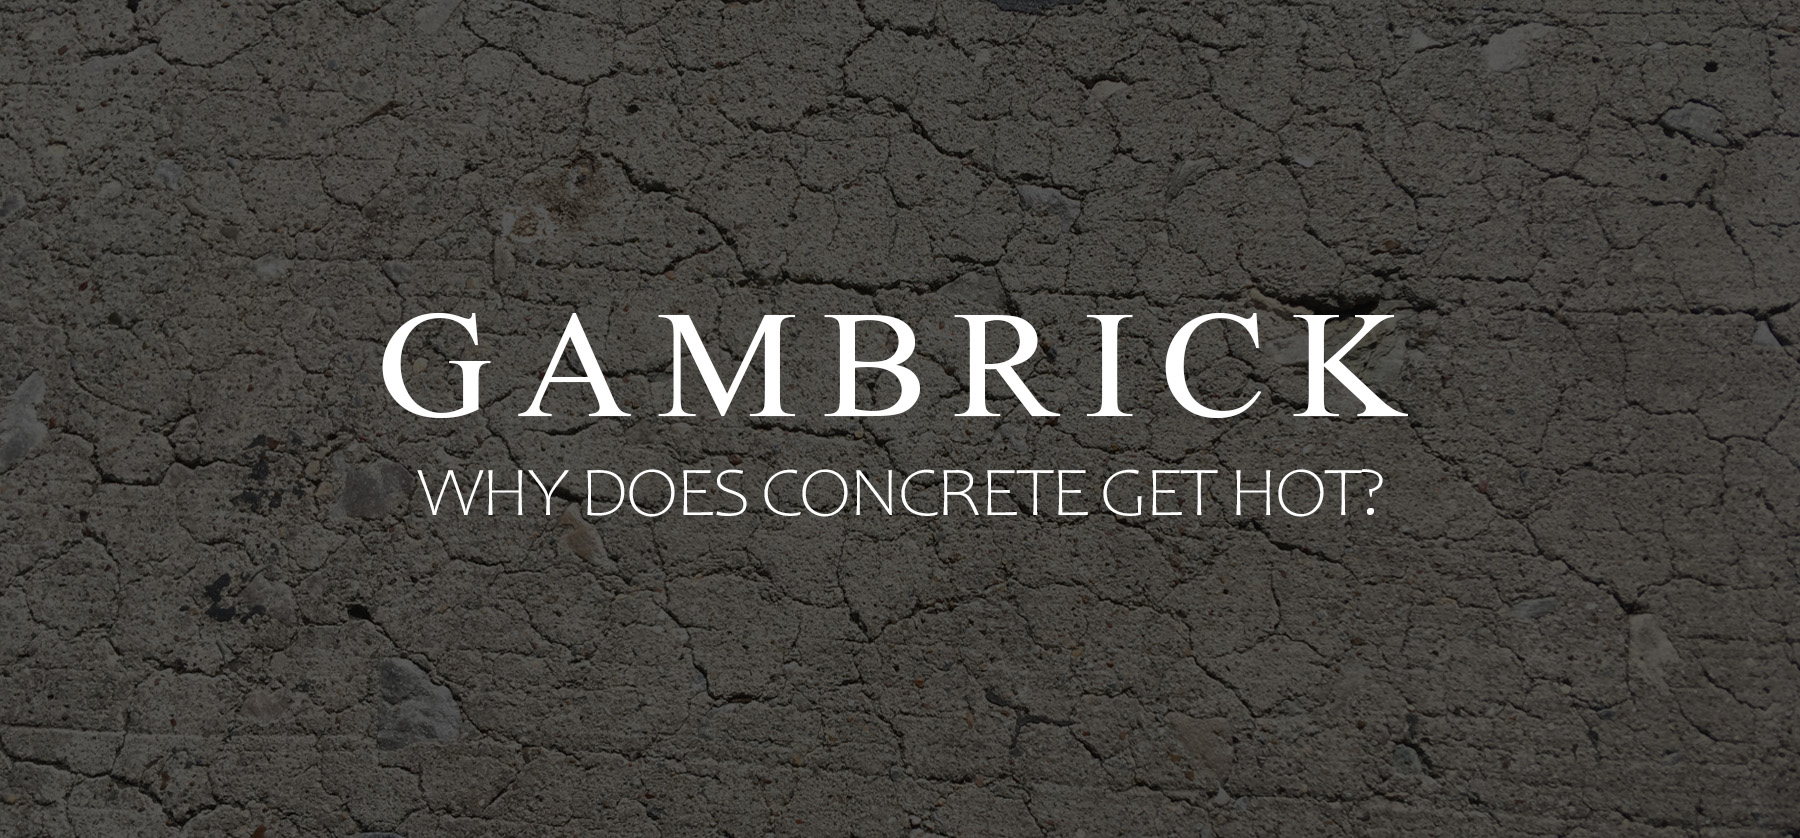 why does concrete get hot banner pic